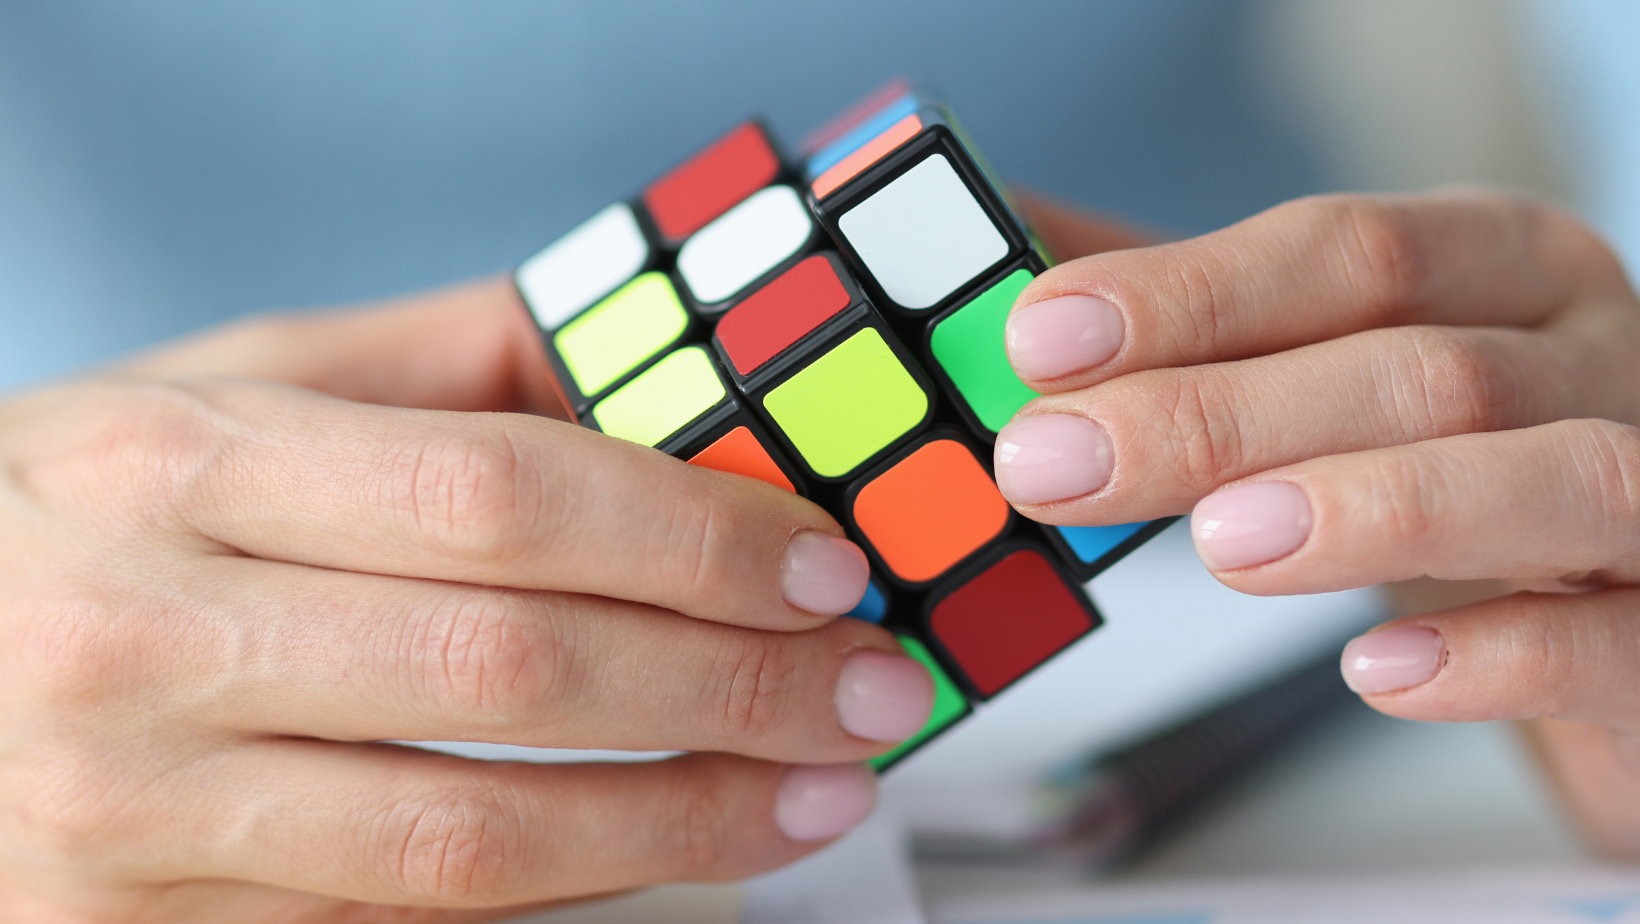 Image of a Rubik's Cube